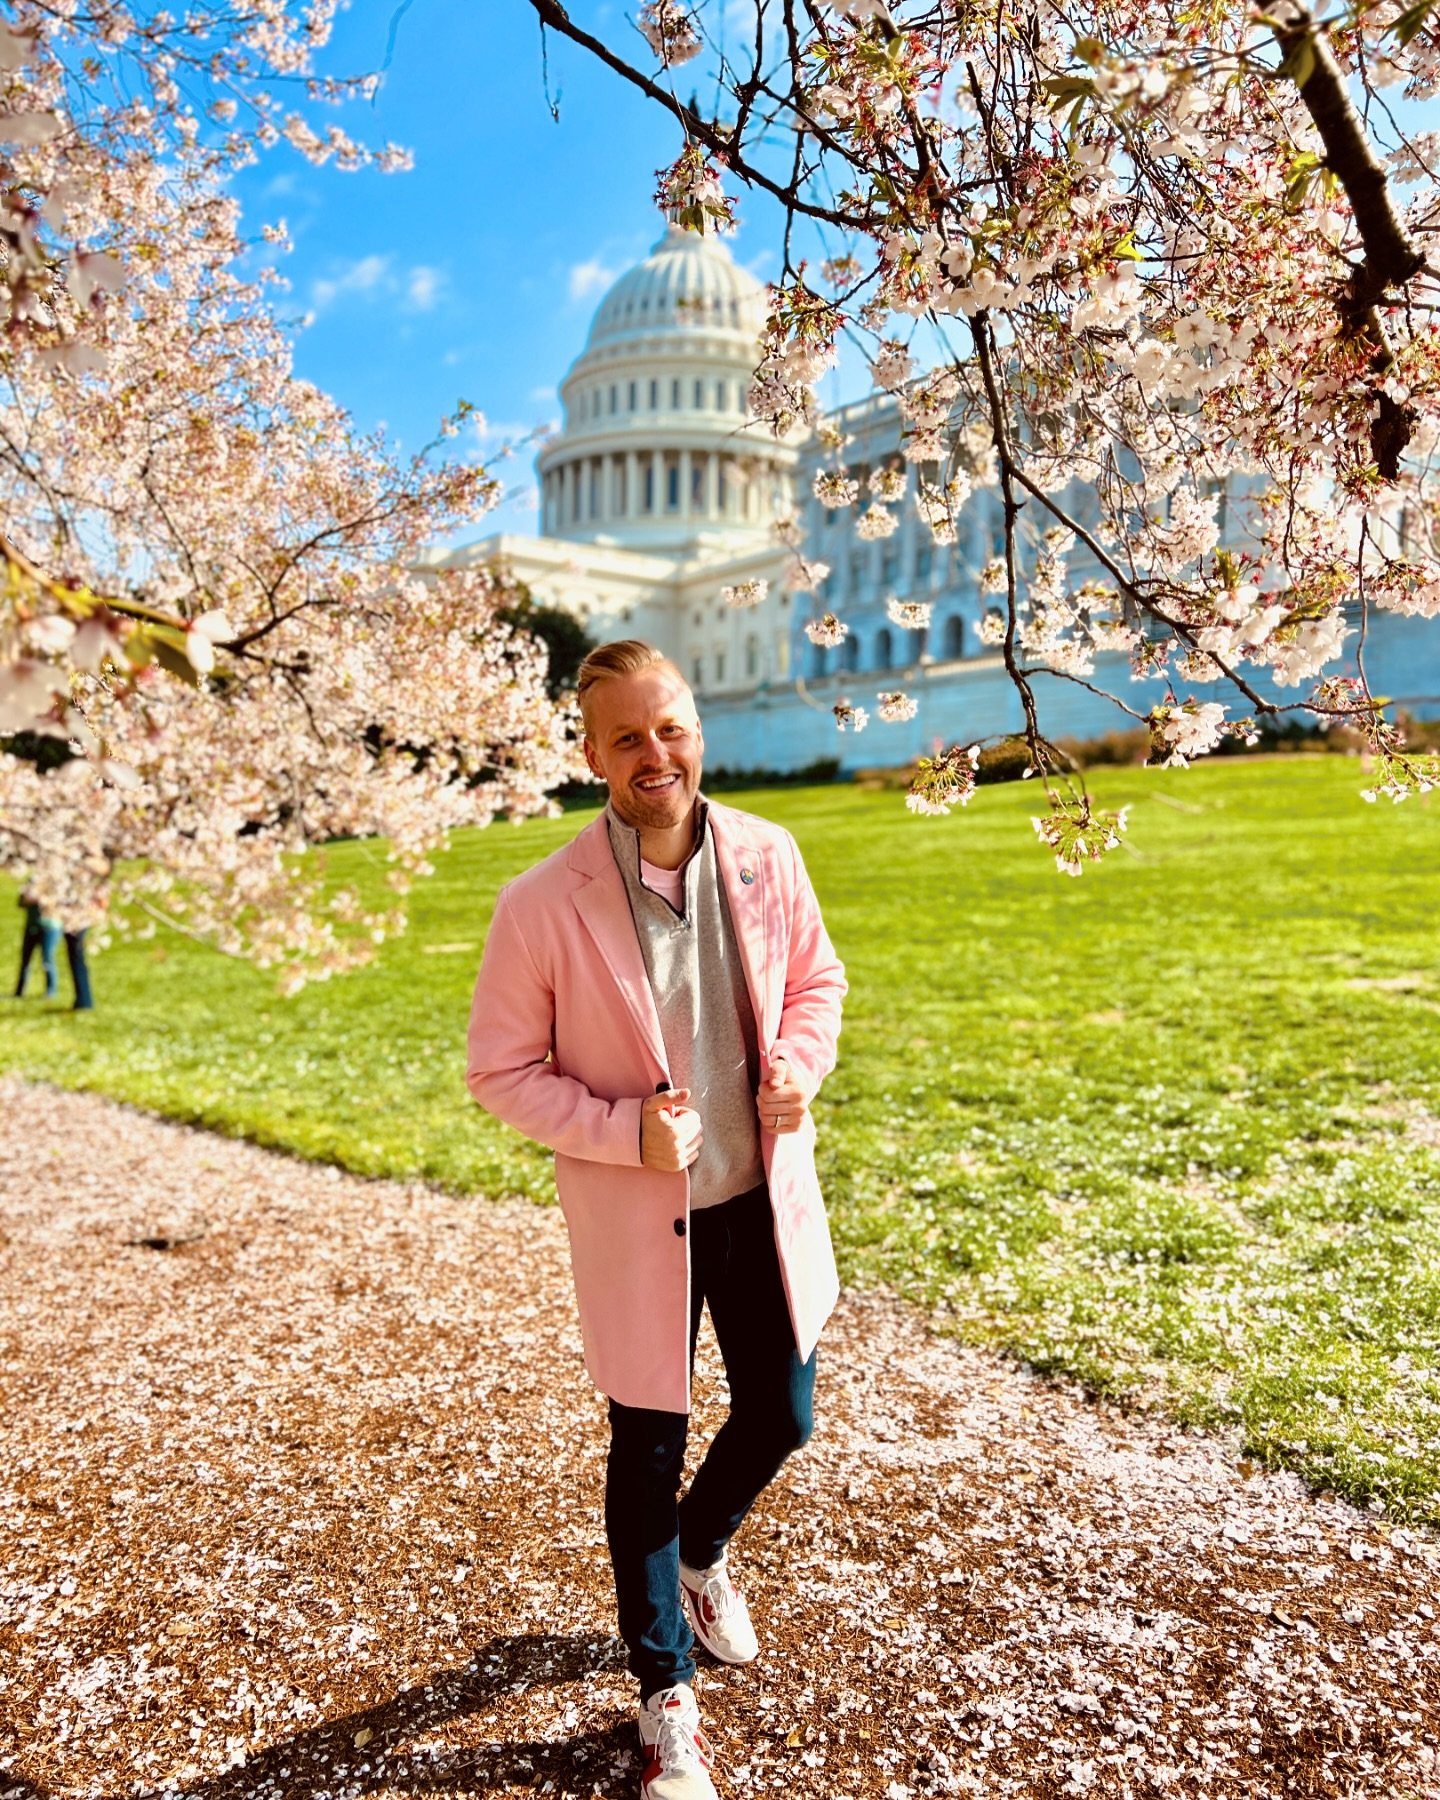 The cherry blossoms in DC got me ready for spring. 🌸
Forgot to post from my trip in March!

#gay #DC #USCapitol #lgbtq #gayrights